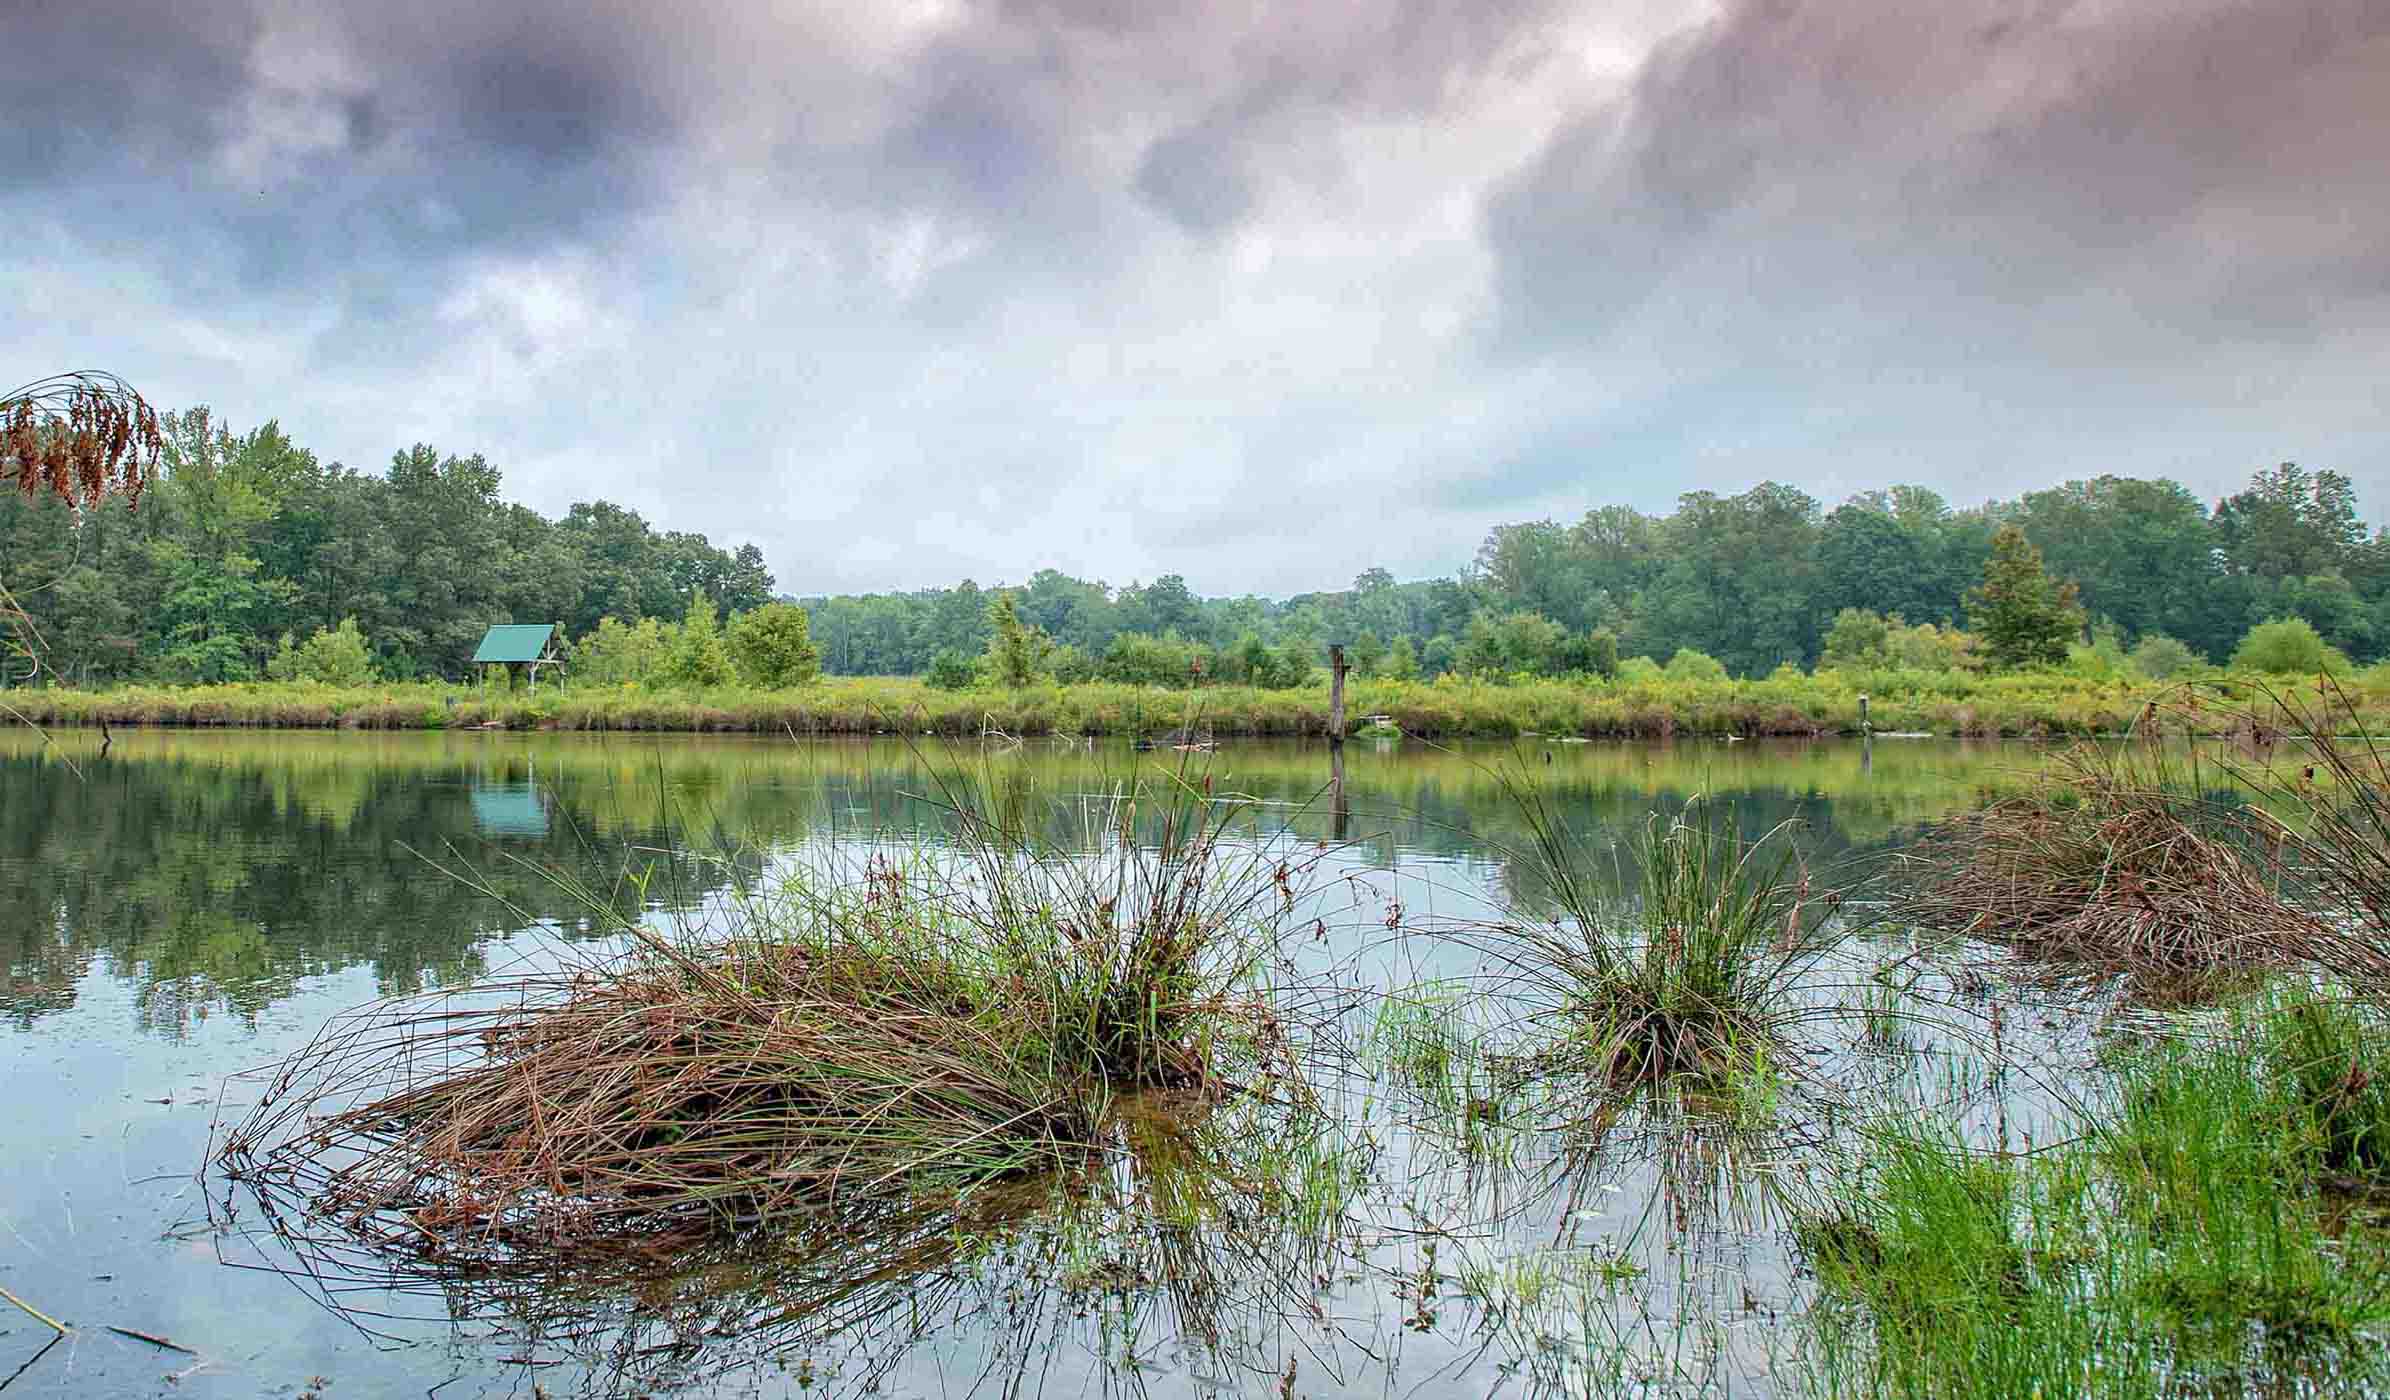 Can ecosystem restoration help save the planet?